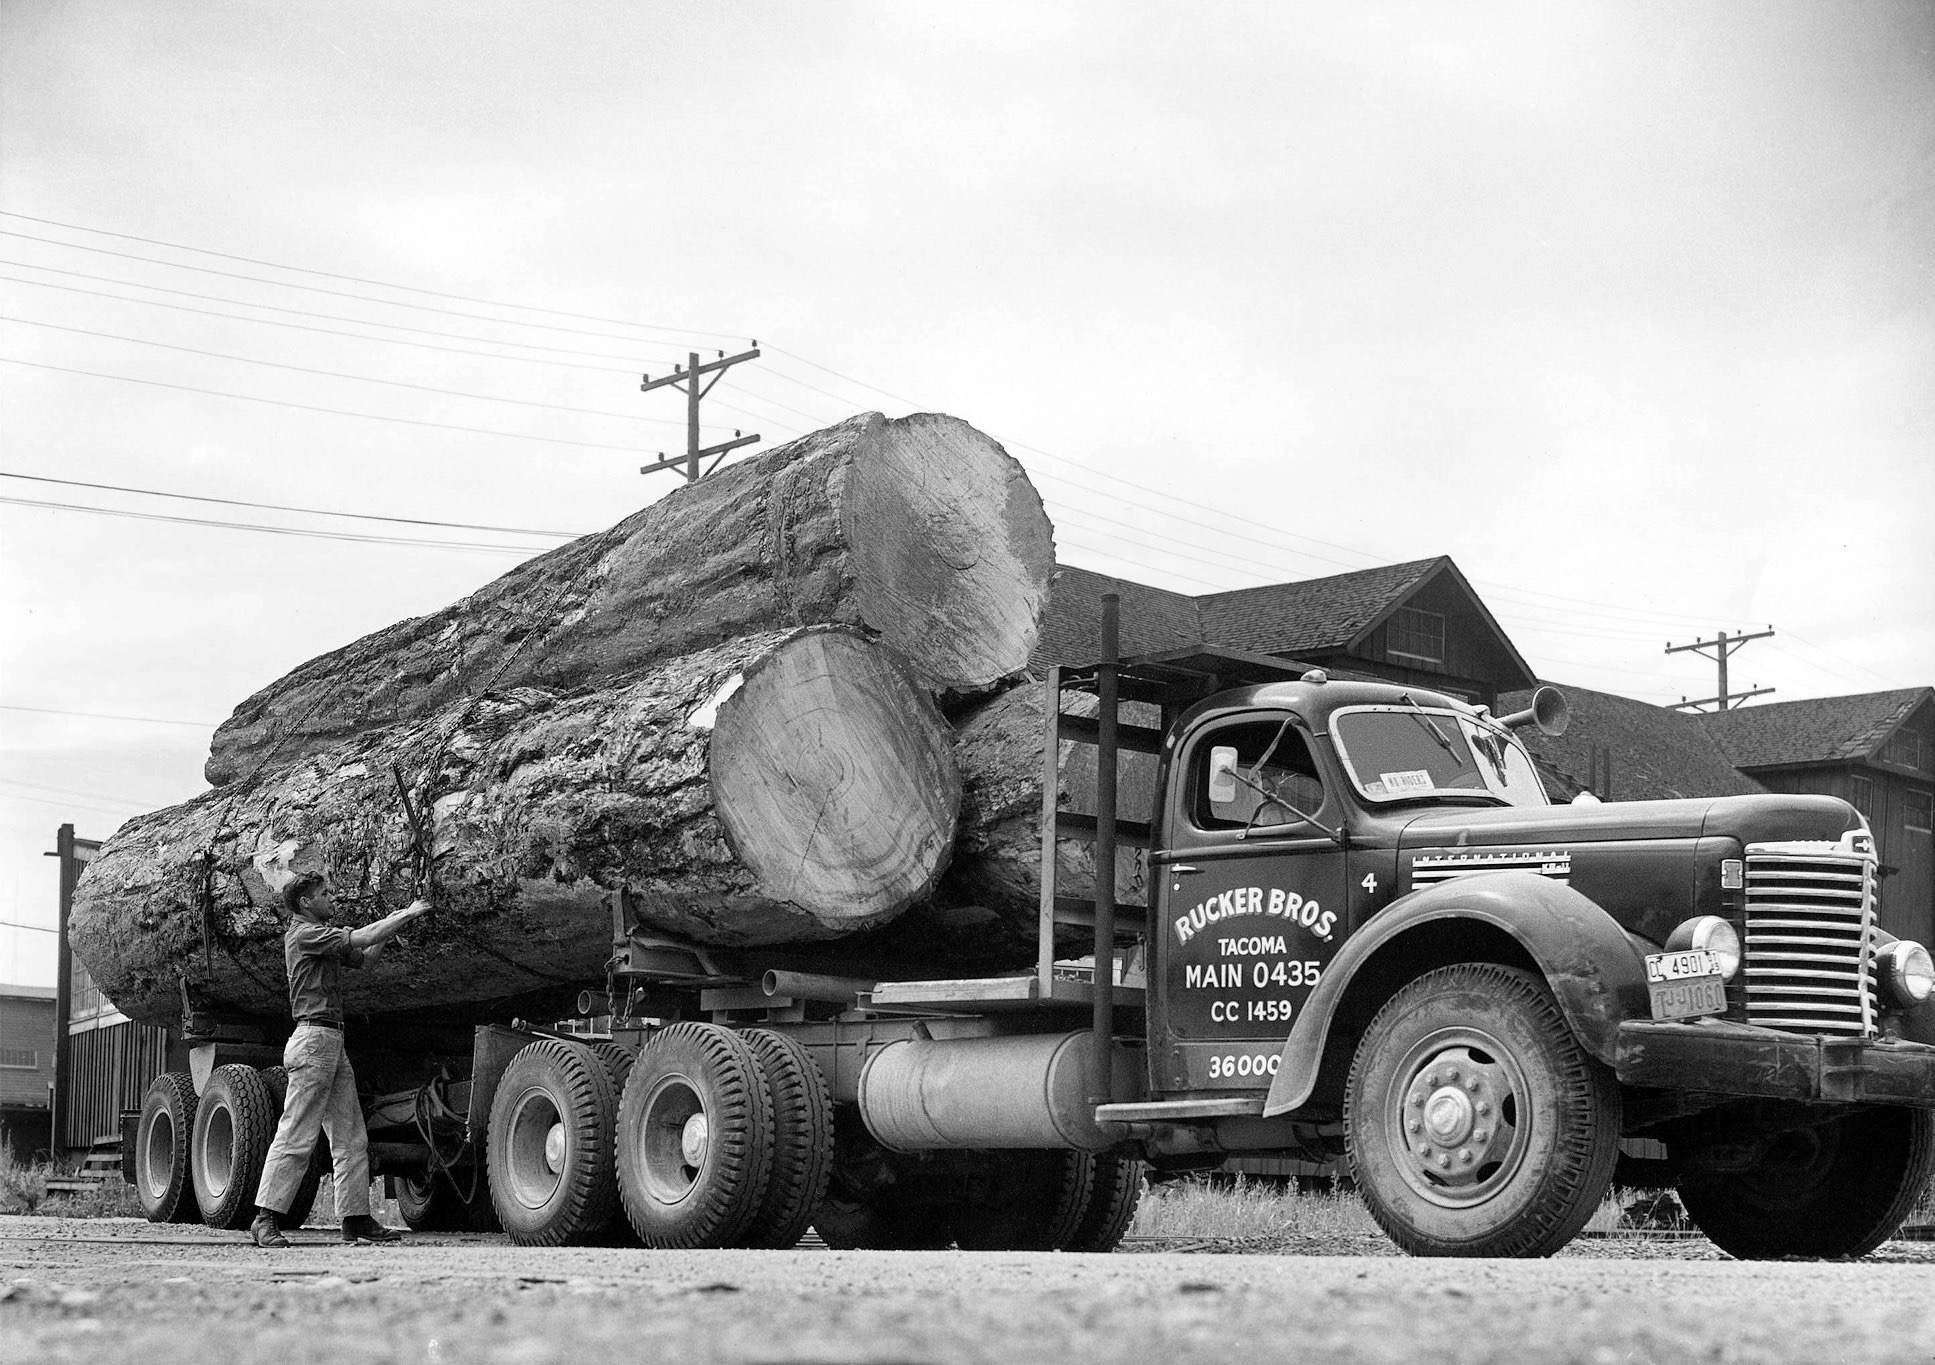 Mill Outlet Lumber